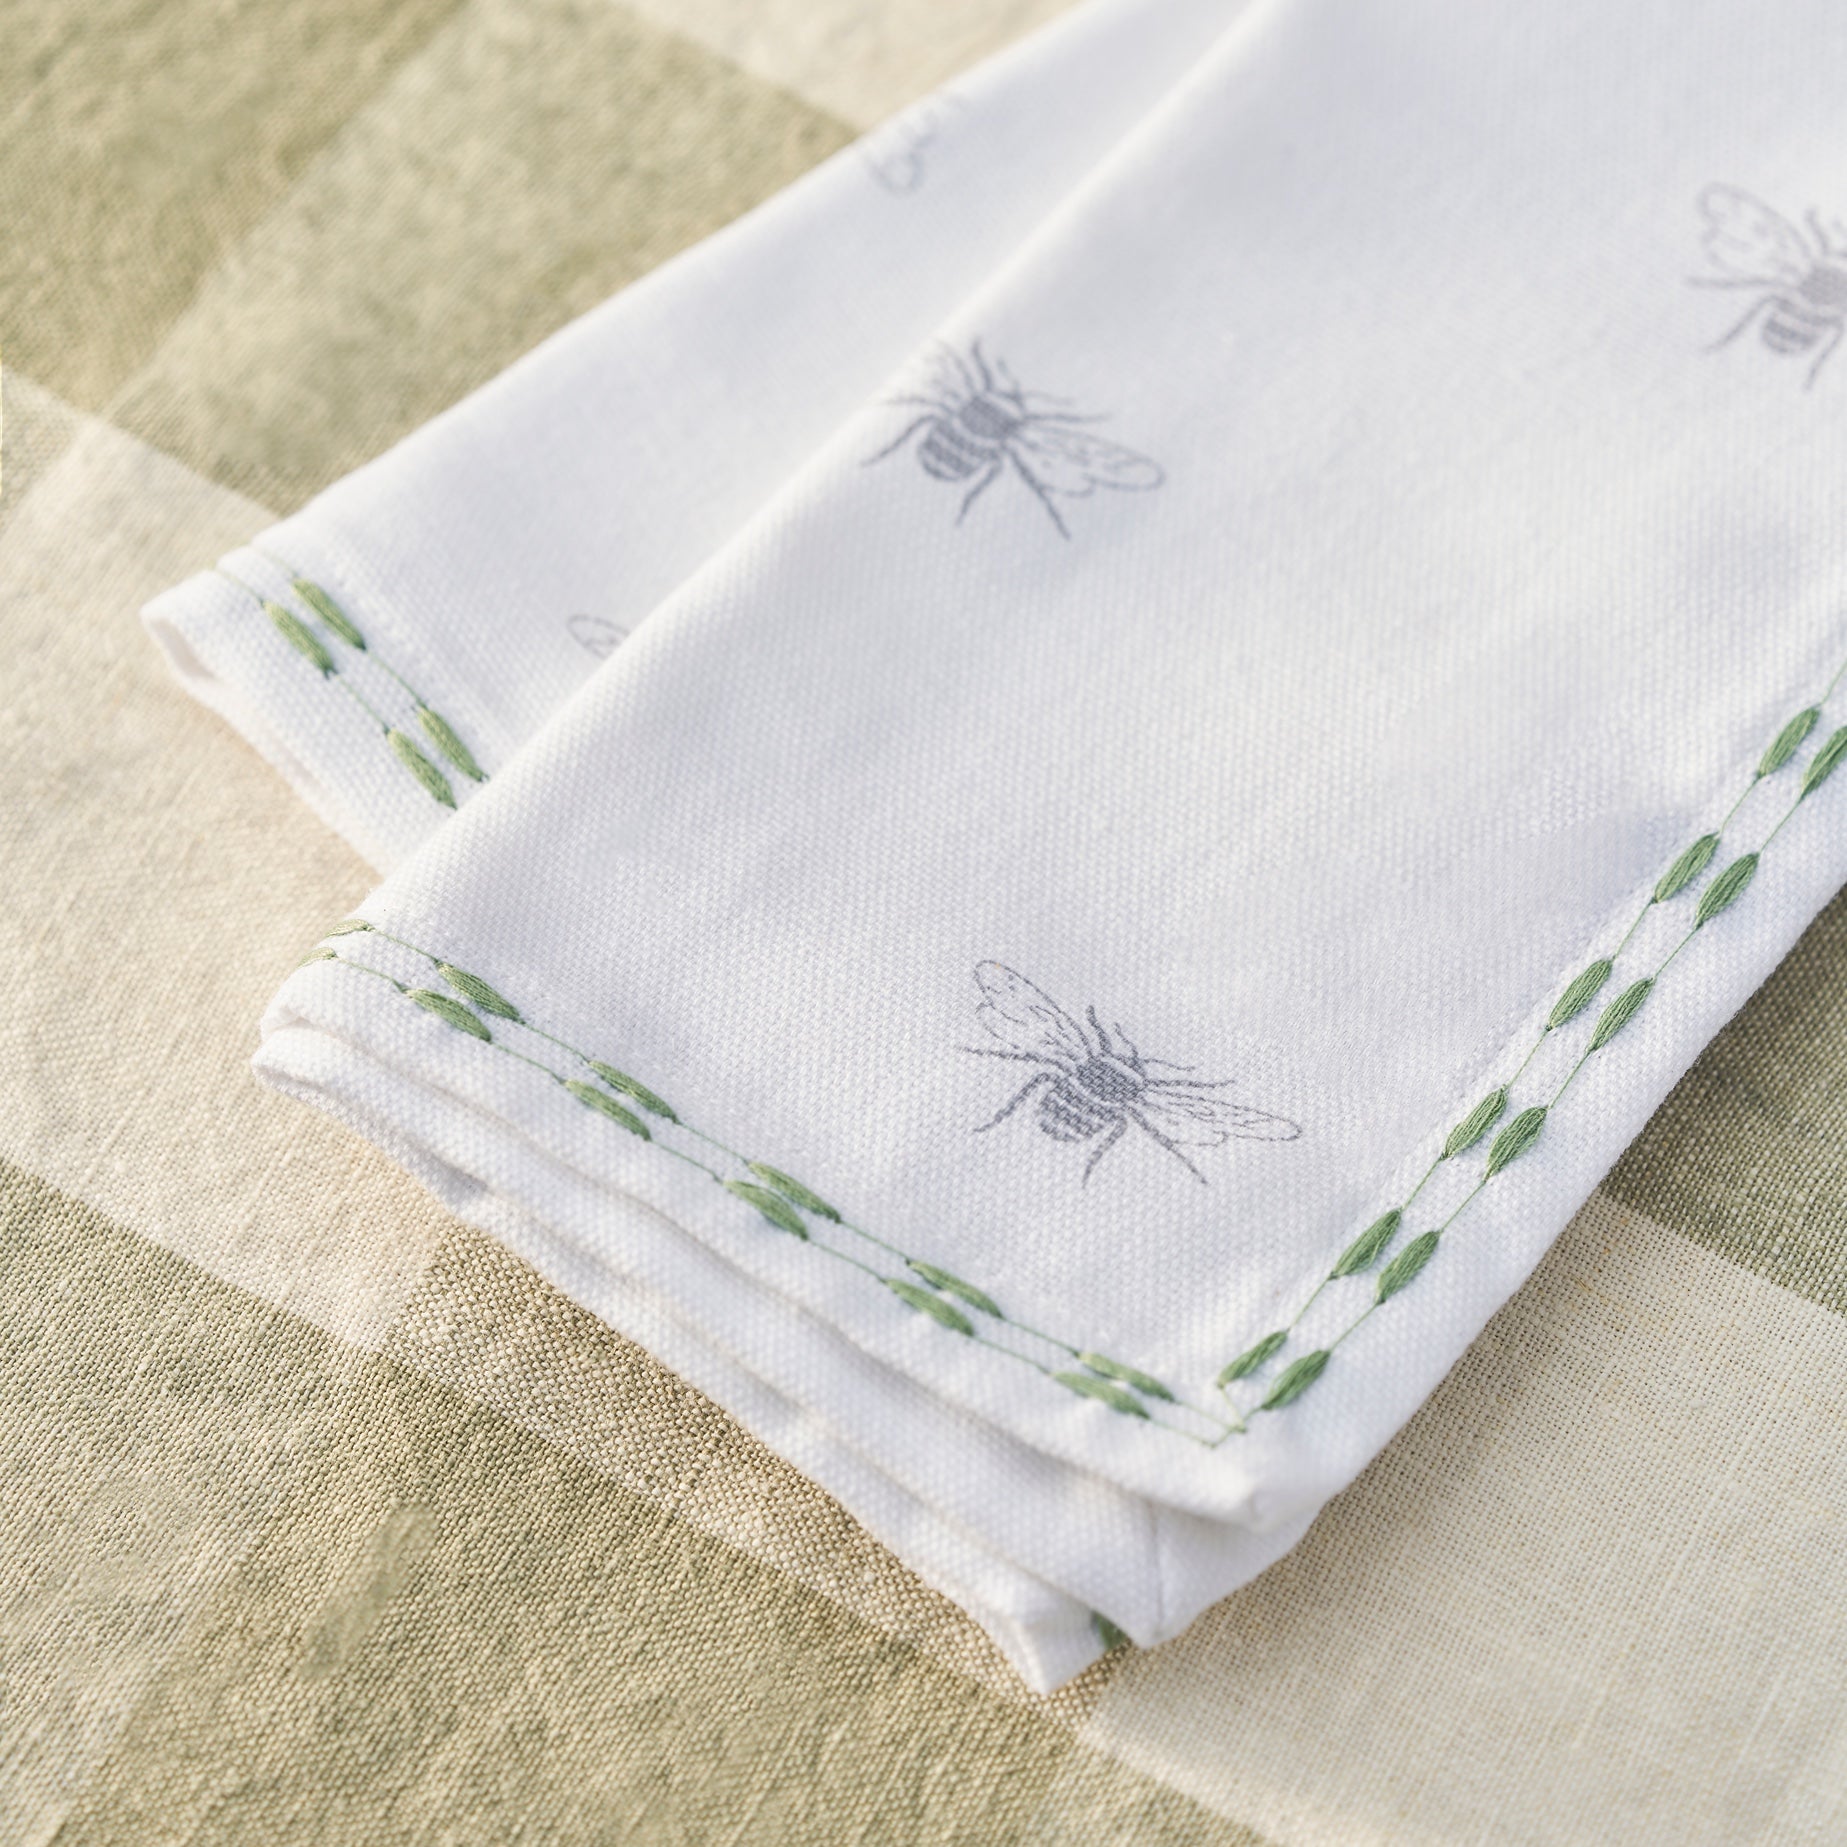 Bees Embroidered Napkins (Set of 4)